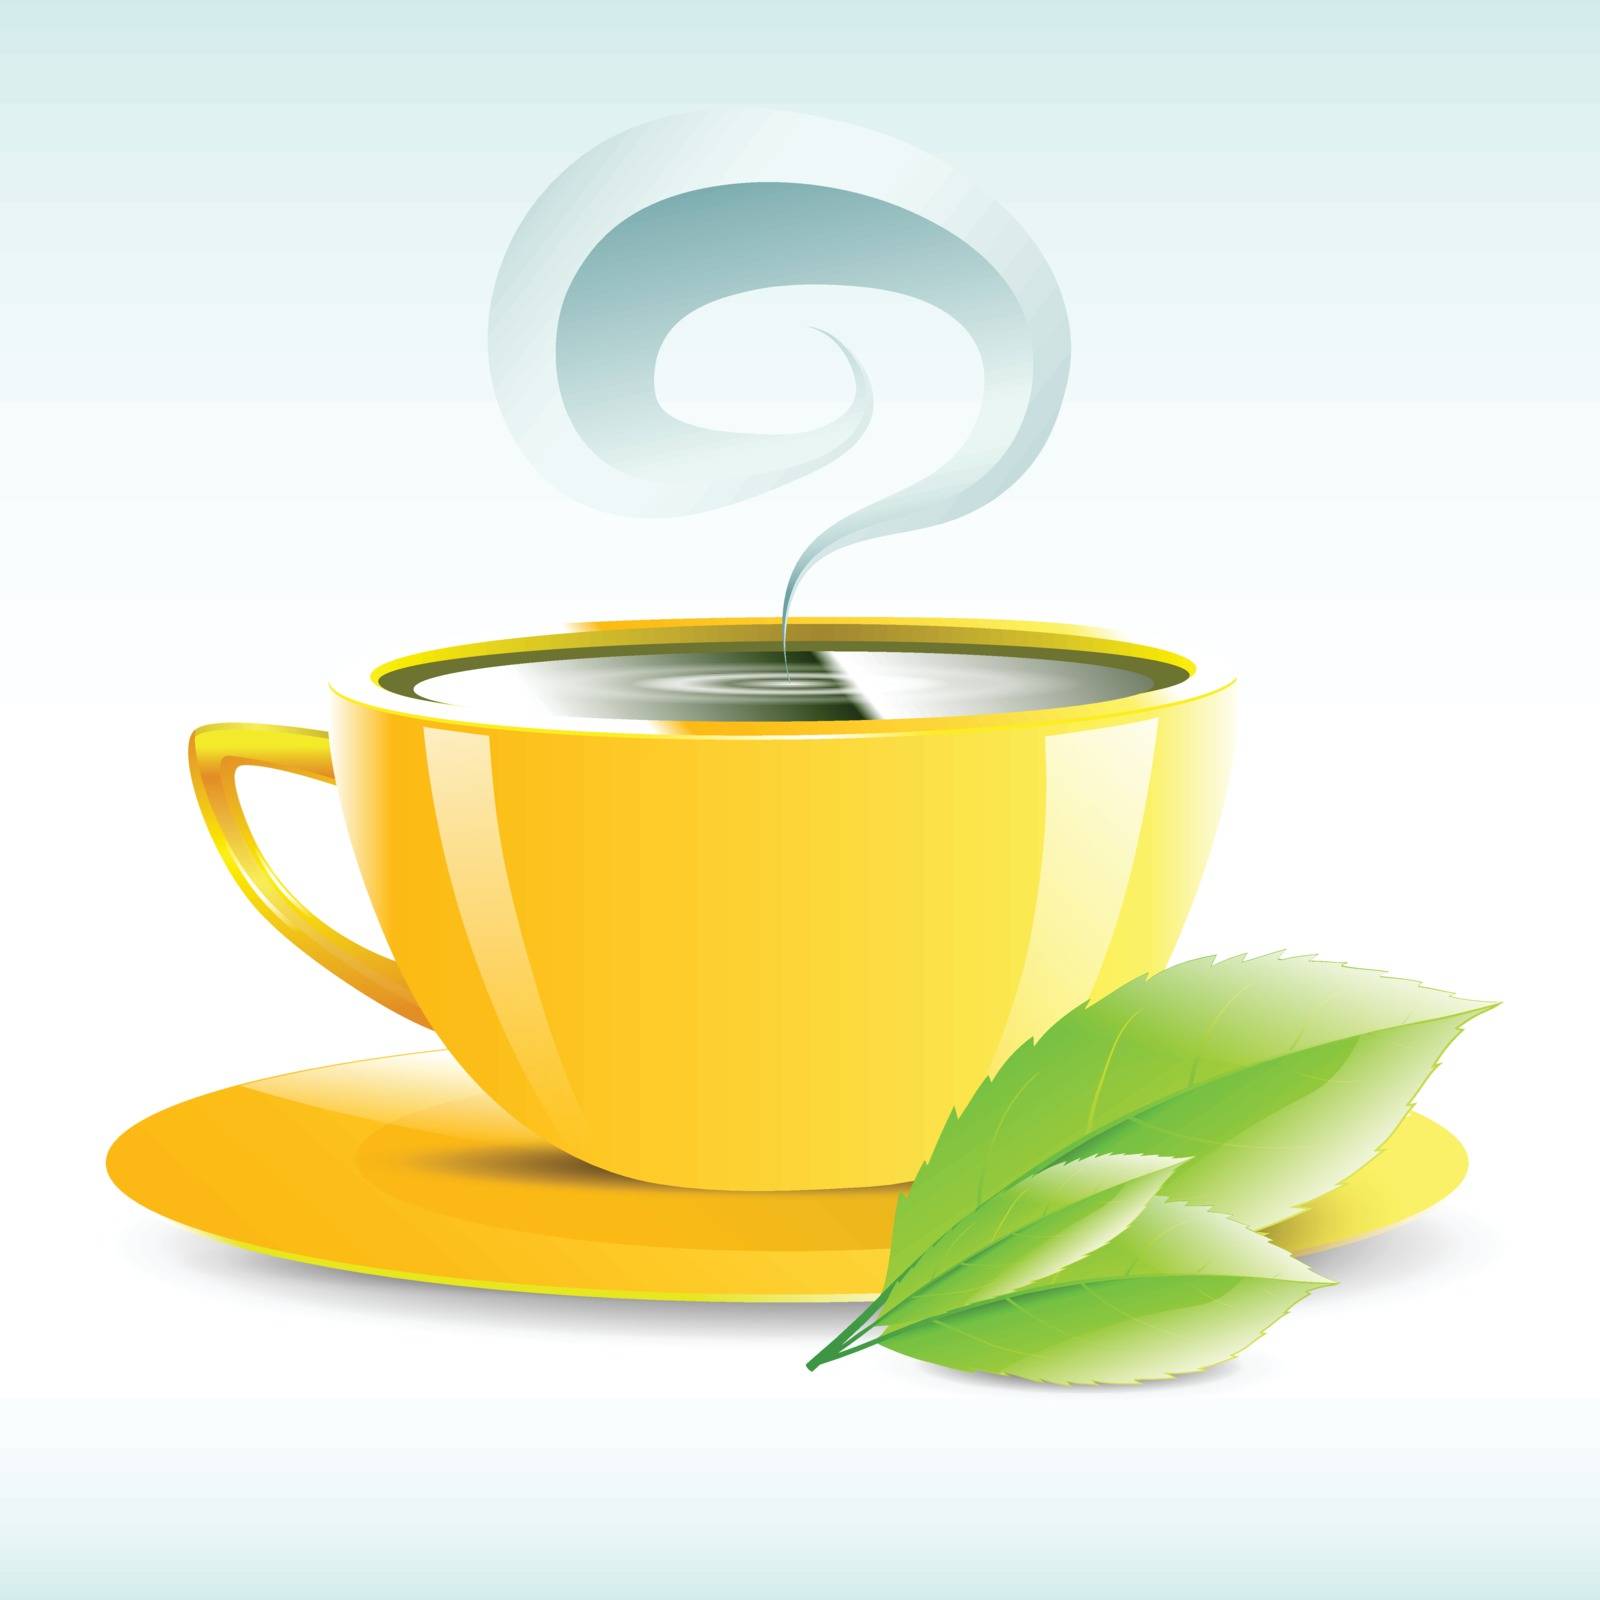 vectovector illustration of a yellow cup of hot tea grain pairsr